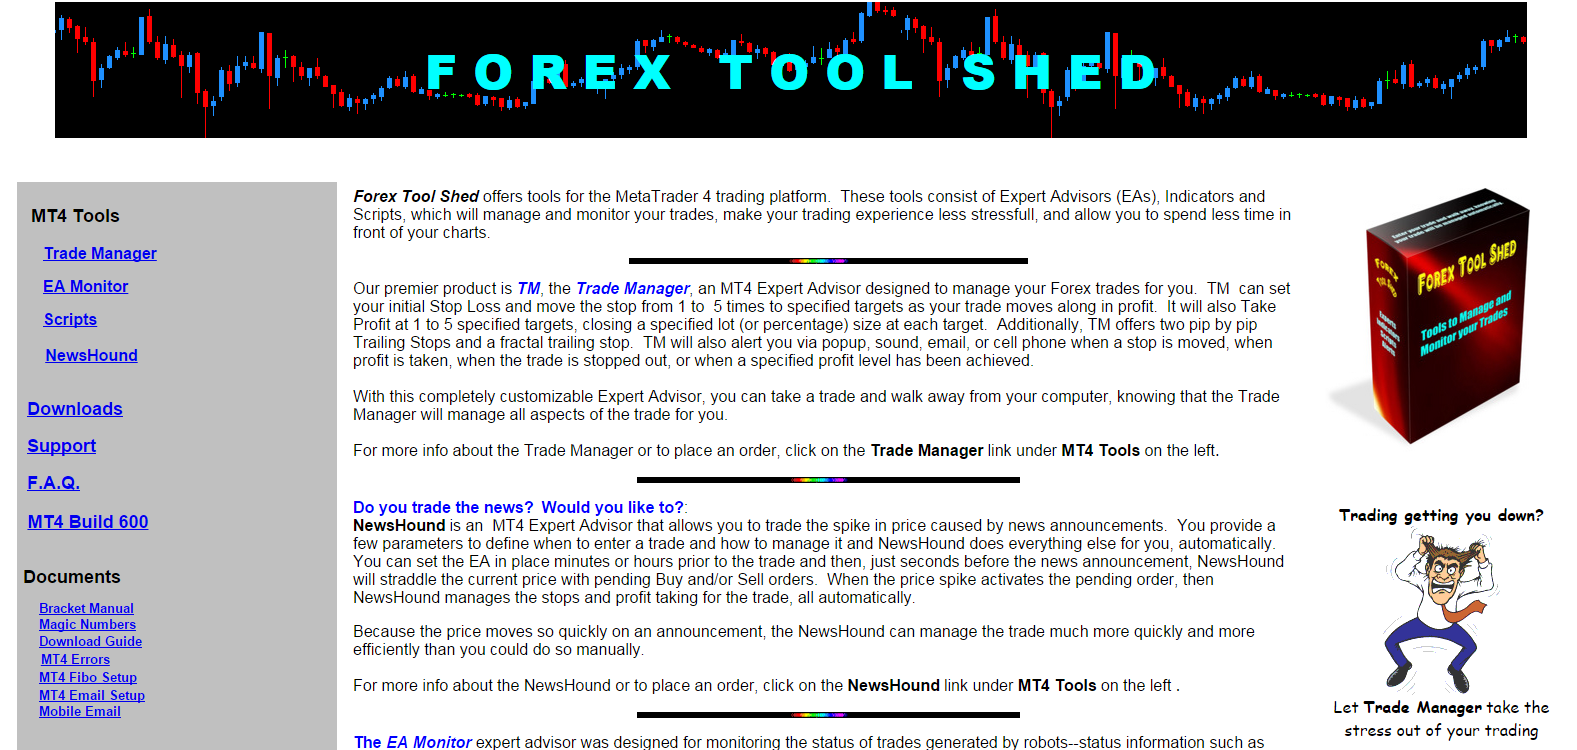 Forex tools